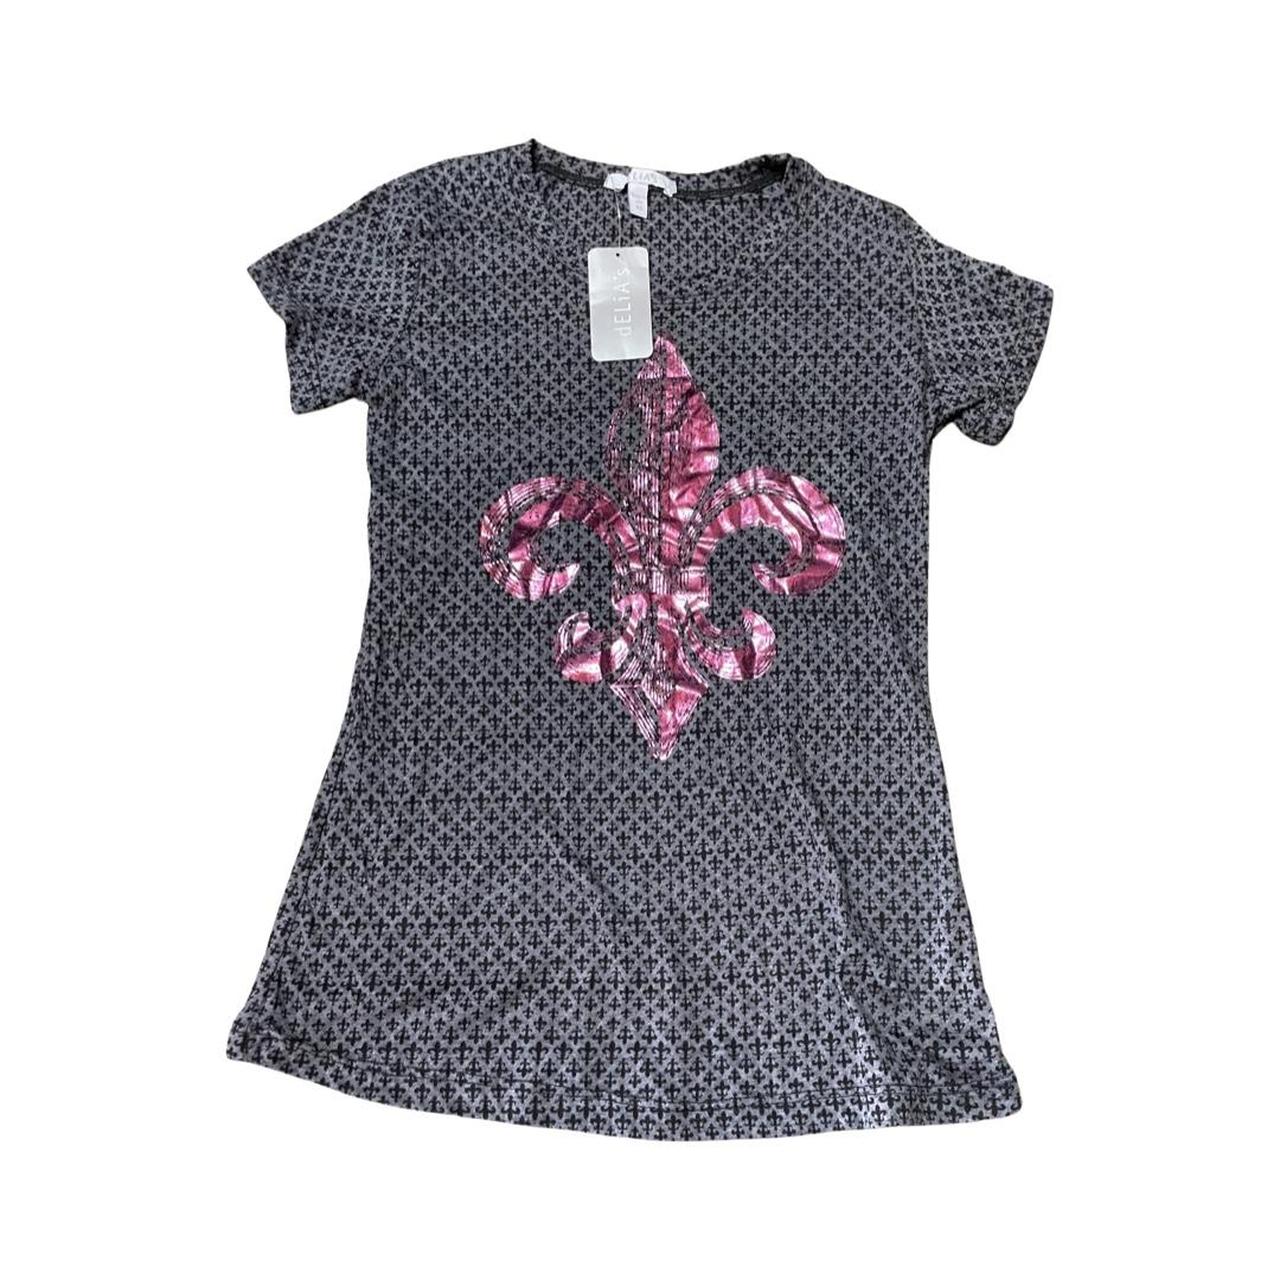 Delia's Women's Grey and Pink T-shirt